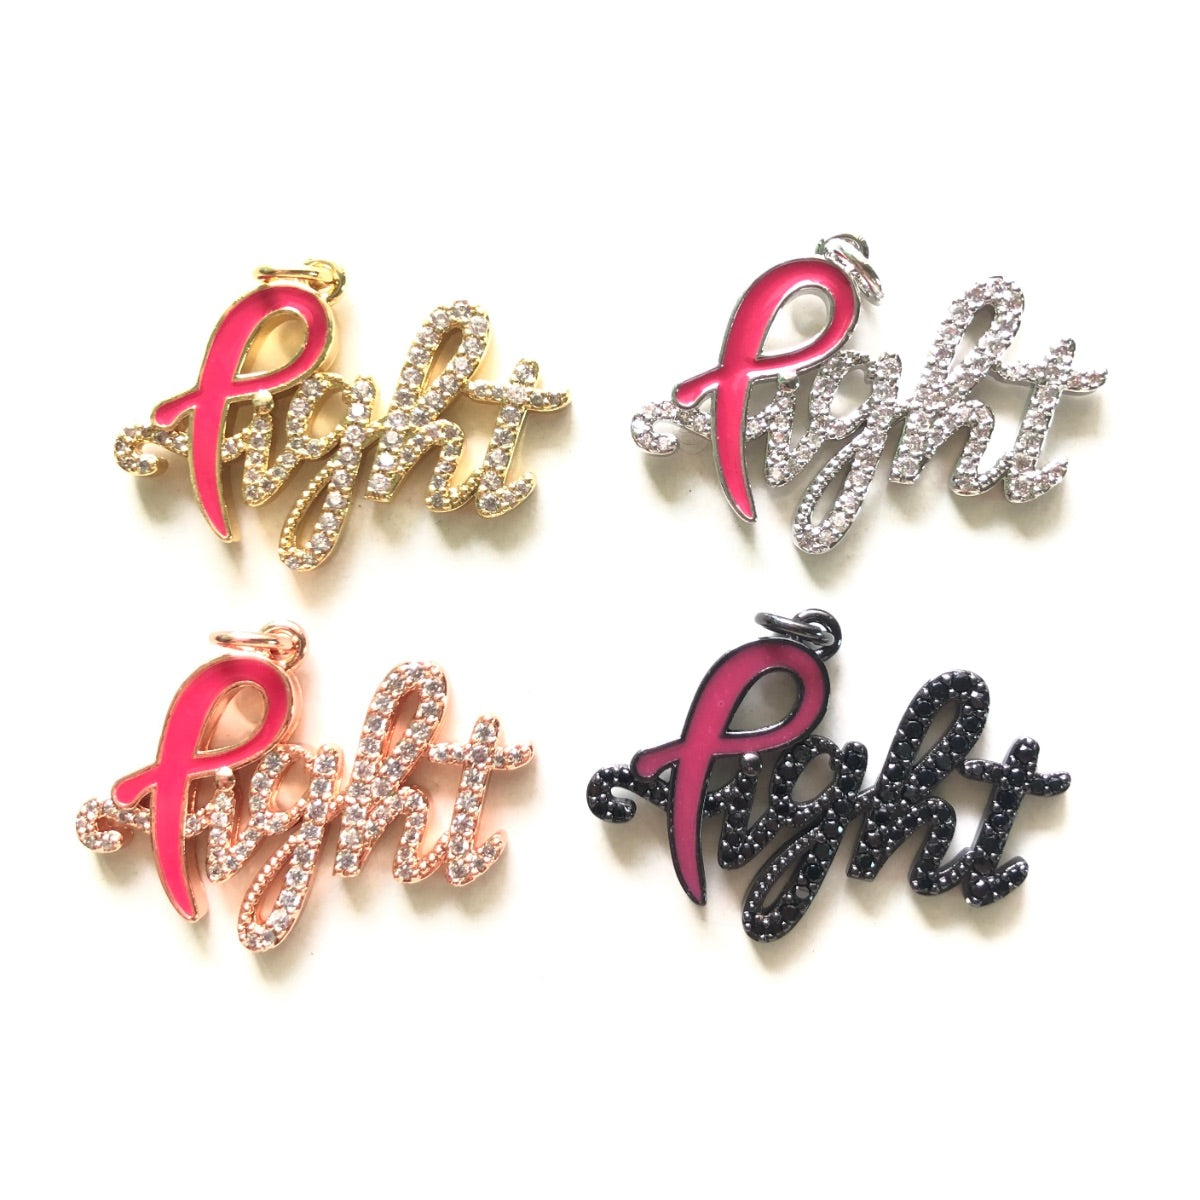 10pcs/lot CZ Paved Pink Ribbon Fight Charms - Breast Cancer Awareness Mix Colors CZ Paved Charms Breast Cancer Awareness Charms Beads Beyond